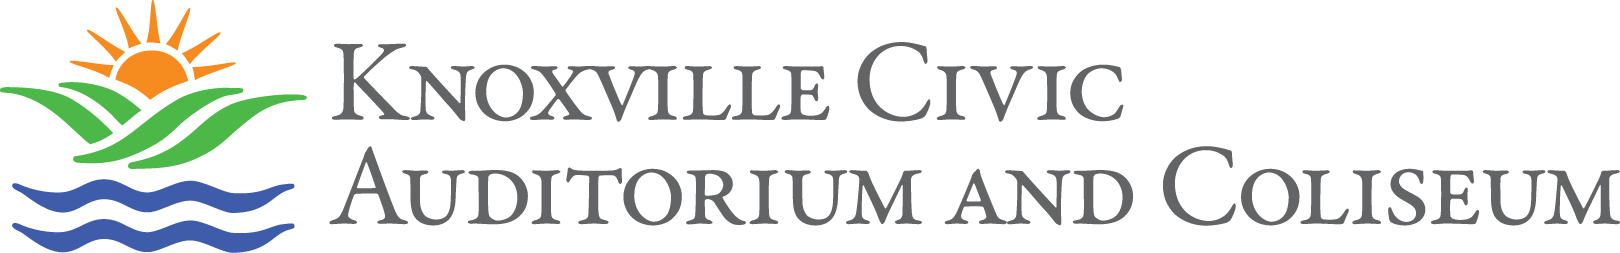 Featured image for “Knoxville Civic Auditorium and Coliseum announces hires, promotions”